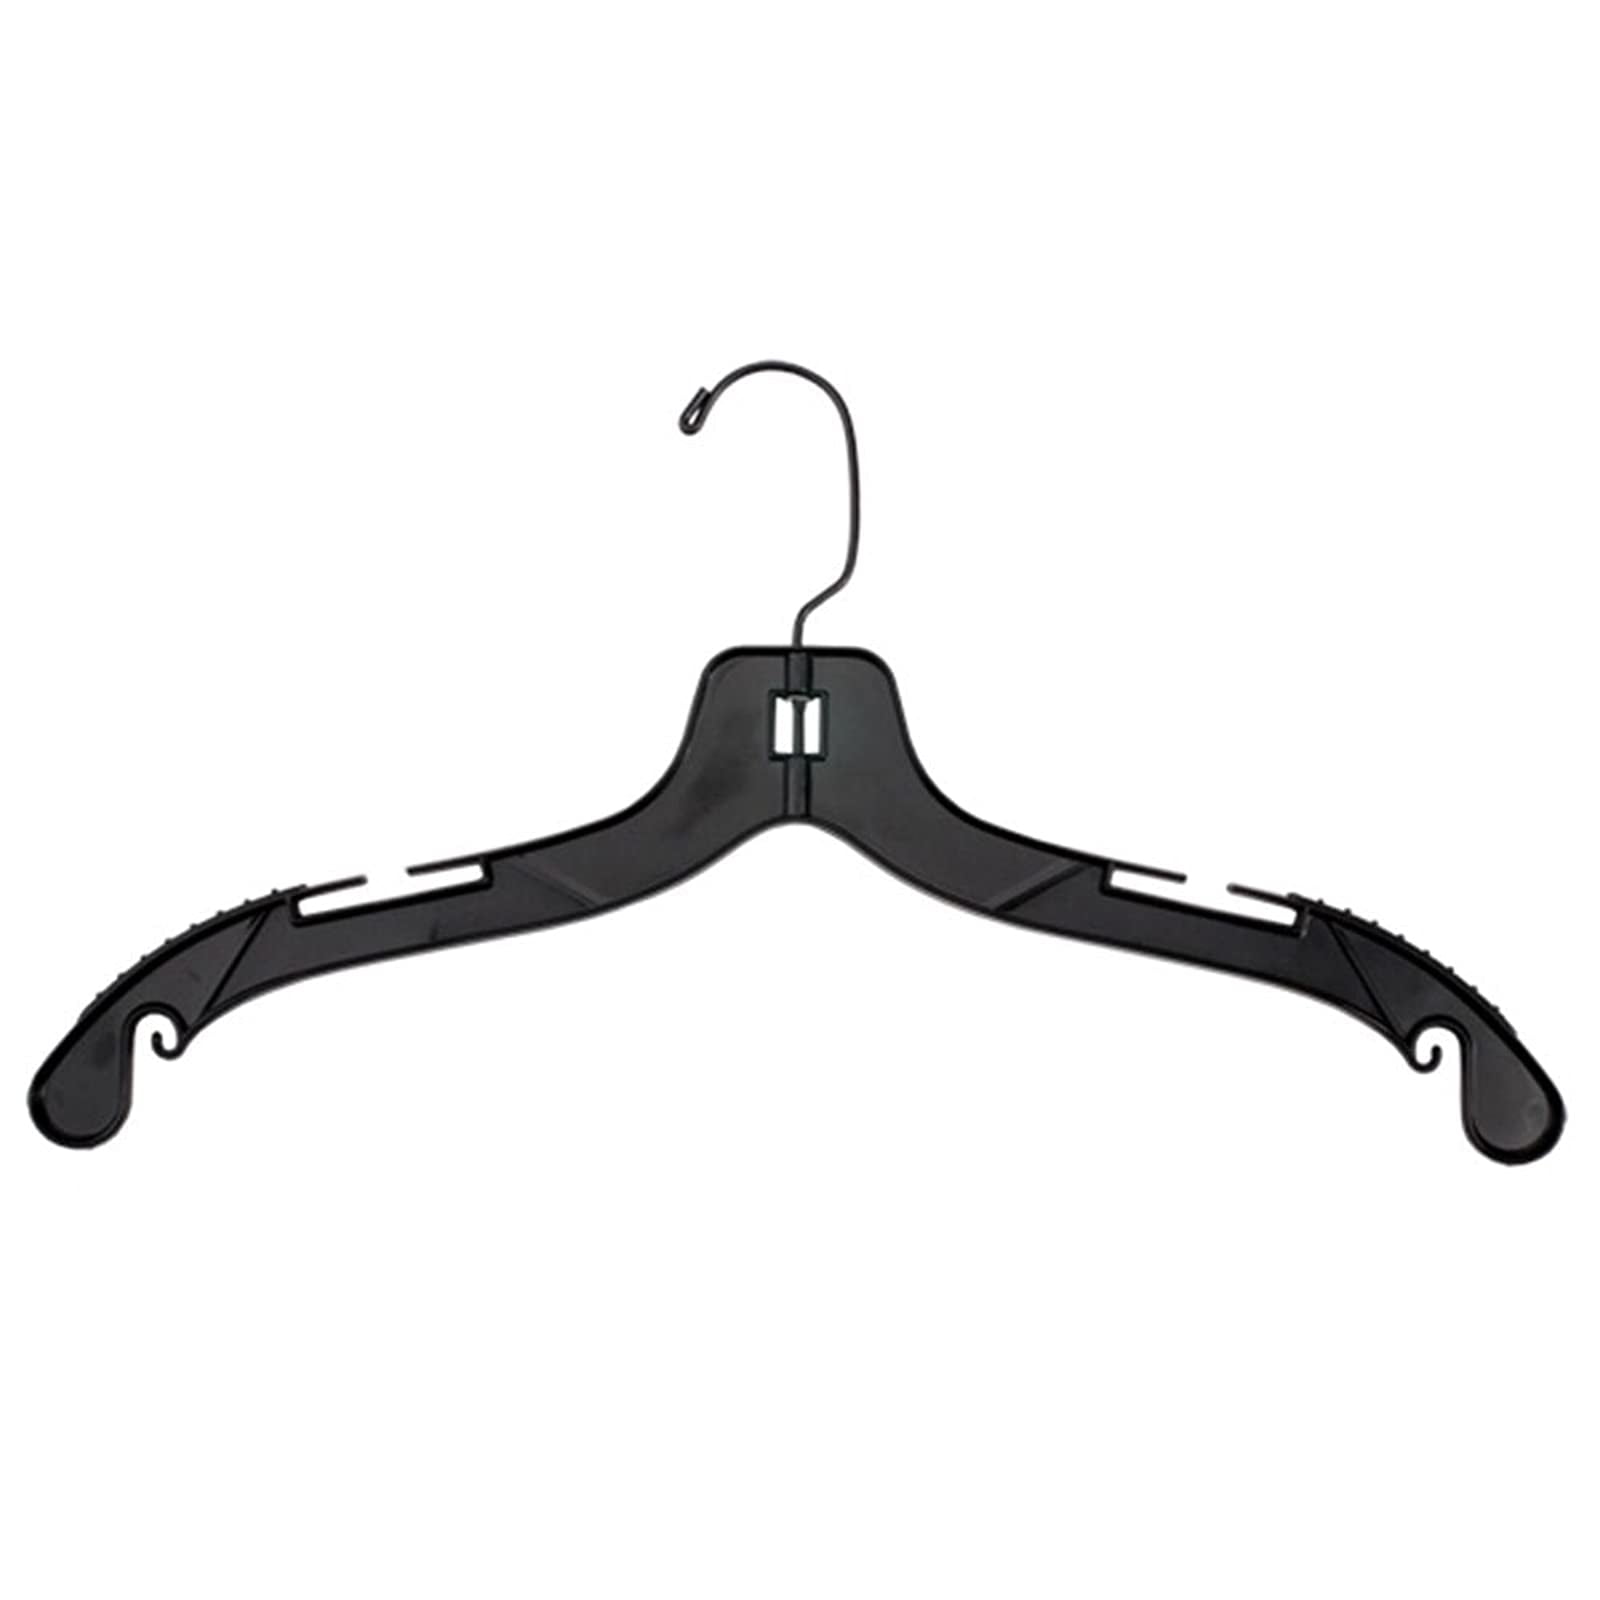 Black Mainetti Pack of 10 Plastic Clip Hangers Shorts 36cm -Trousers Skirts 